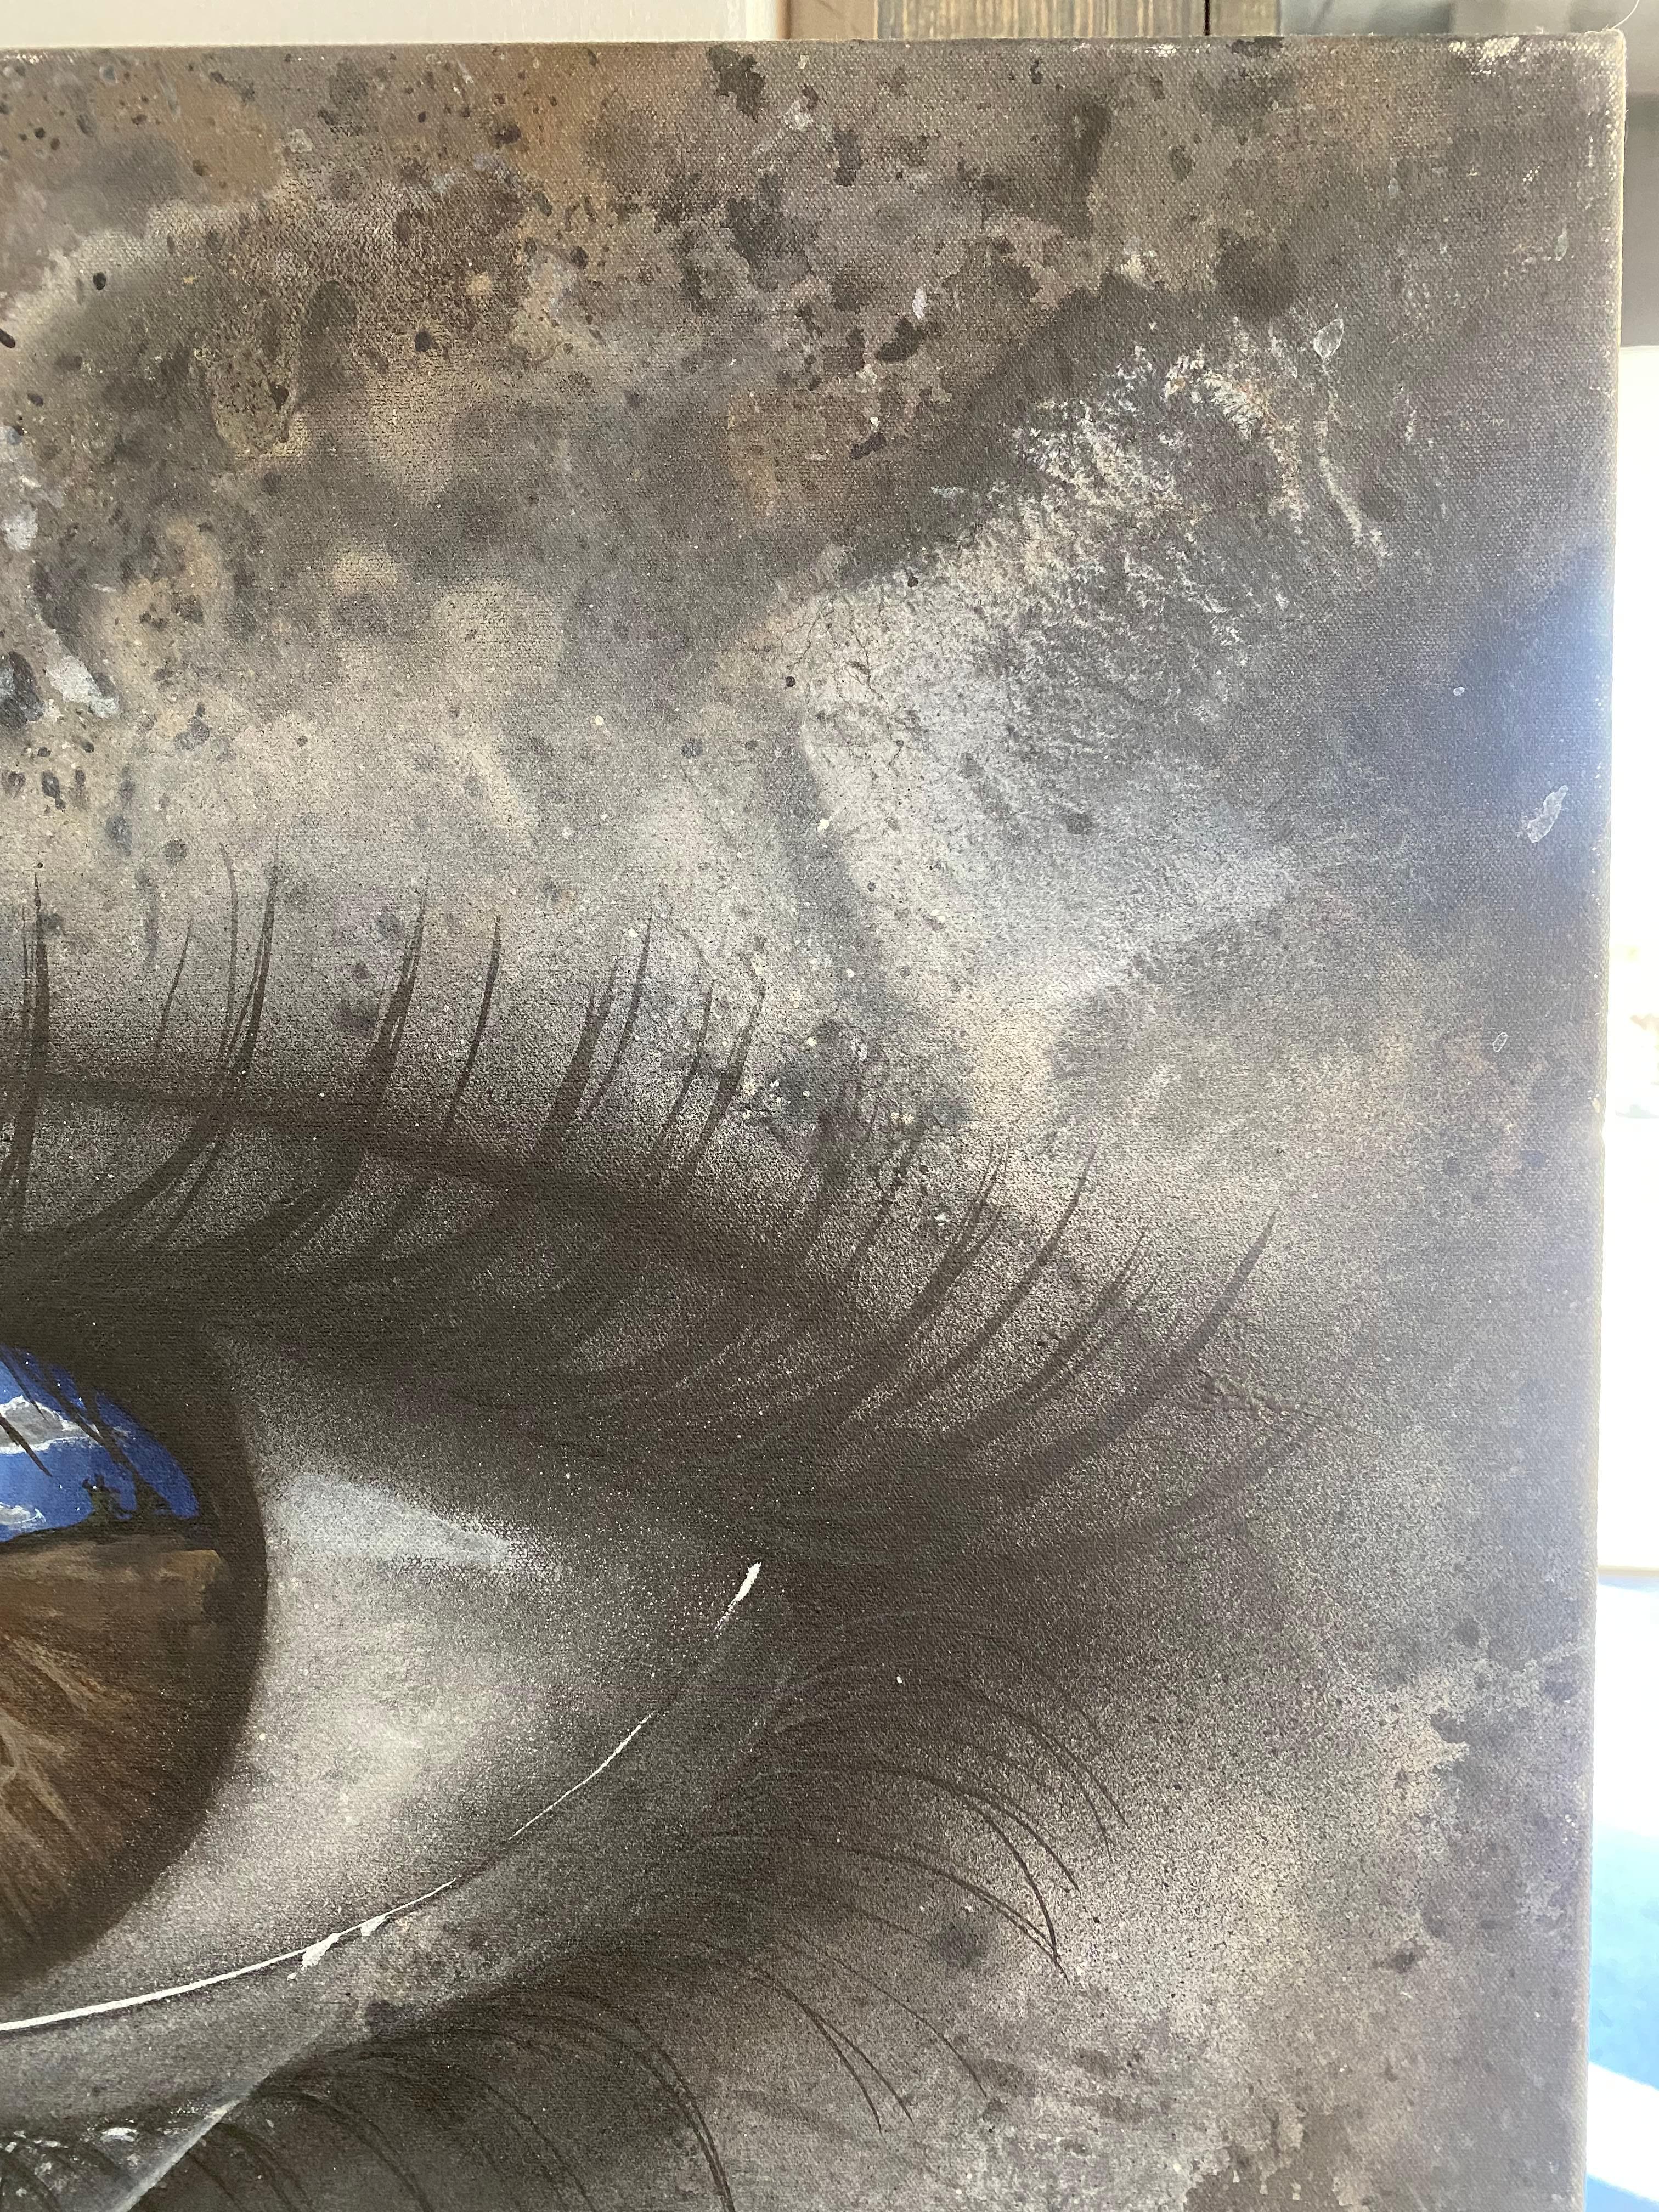 Infinite - Street Art Painting by My Dog Sighs